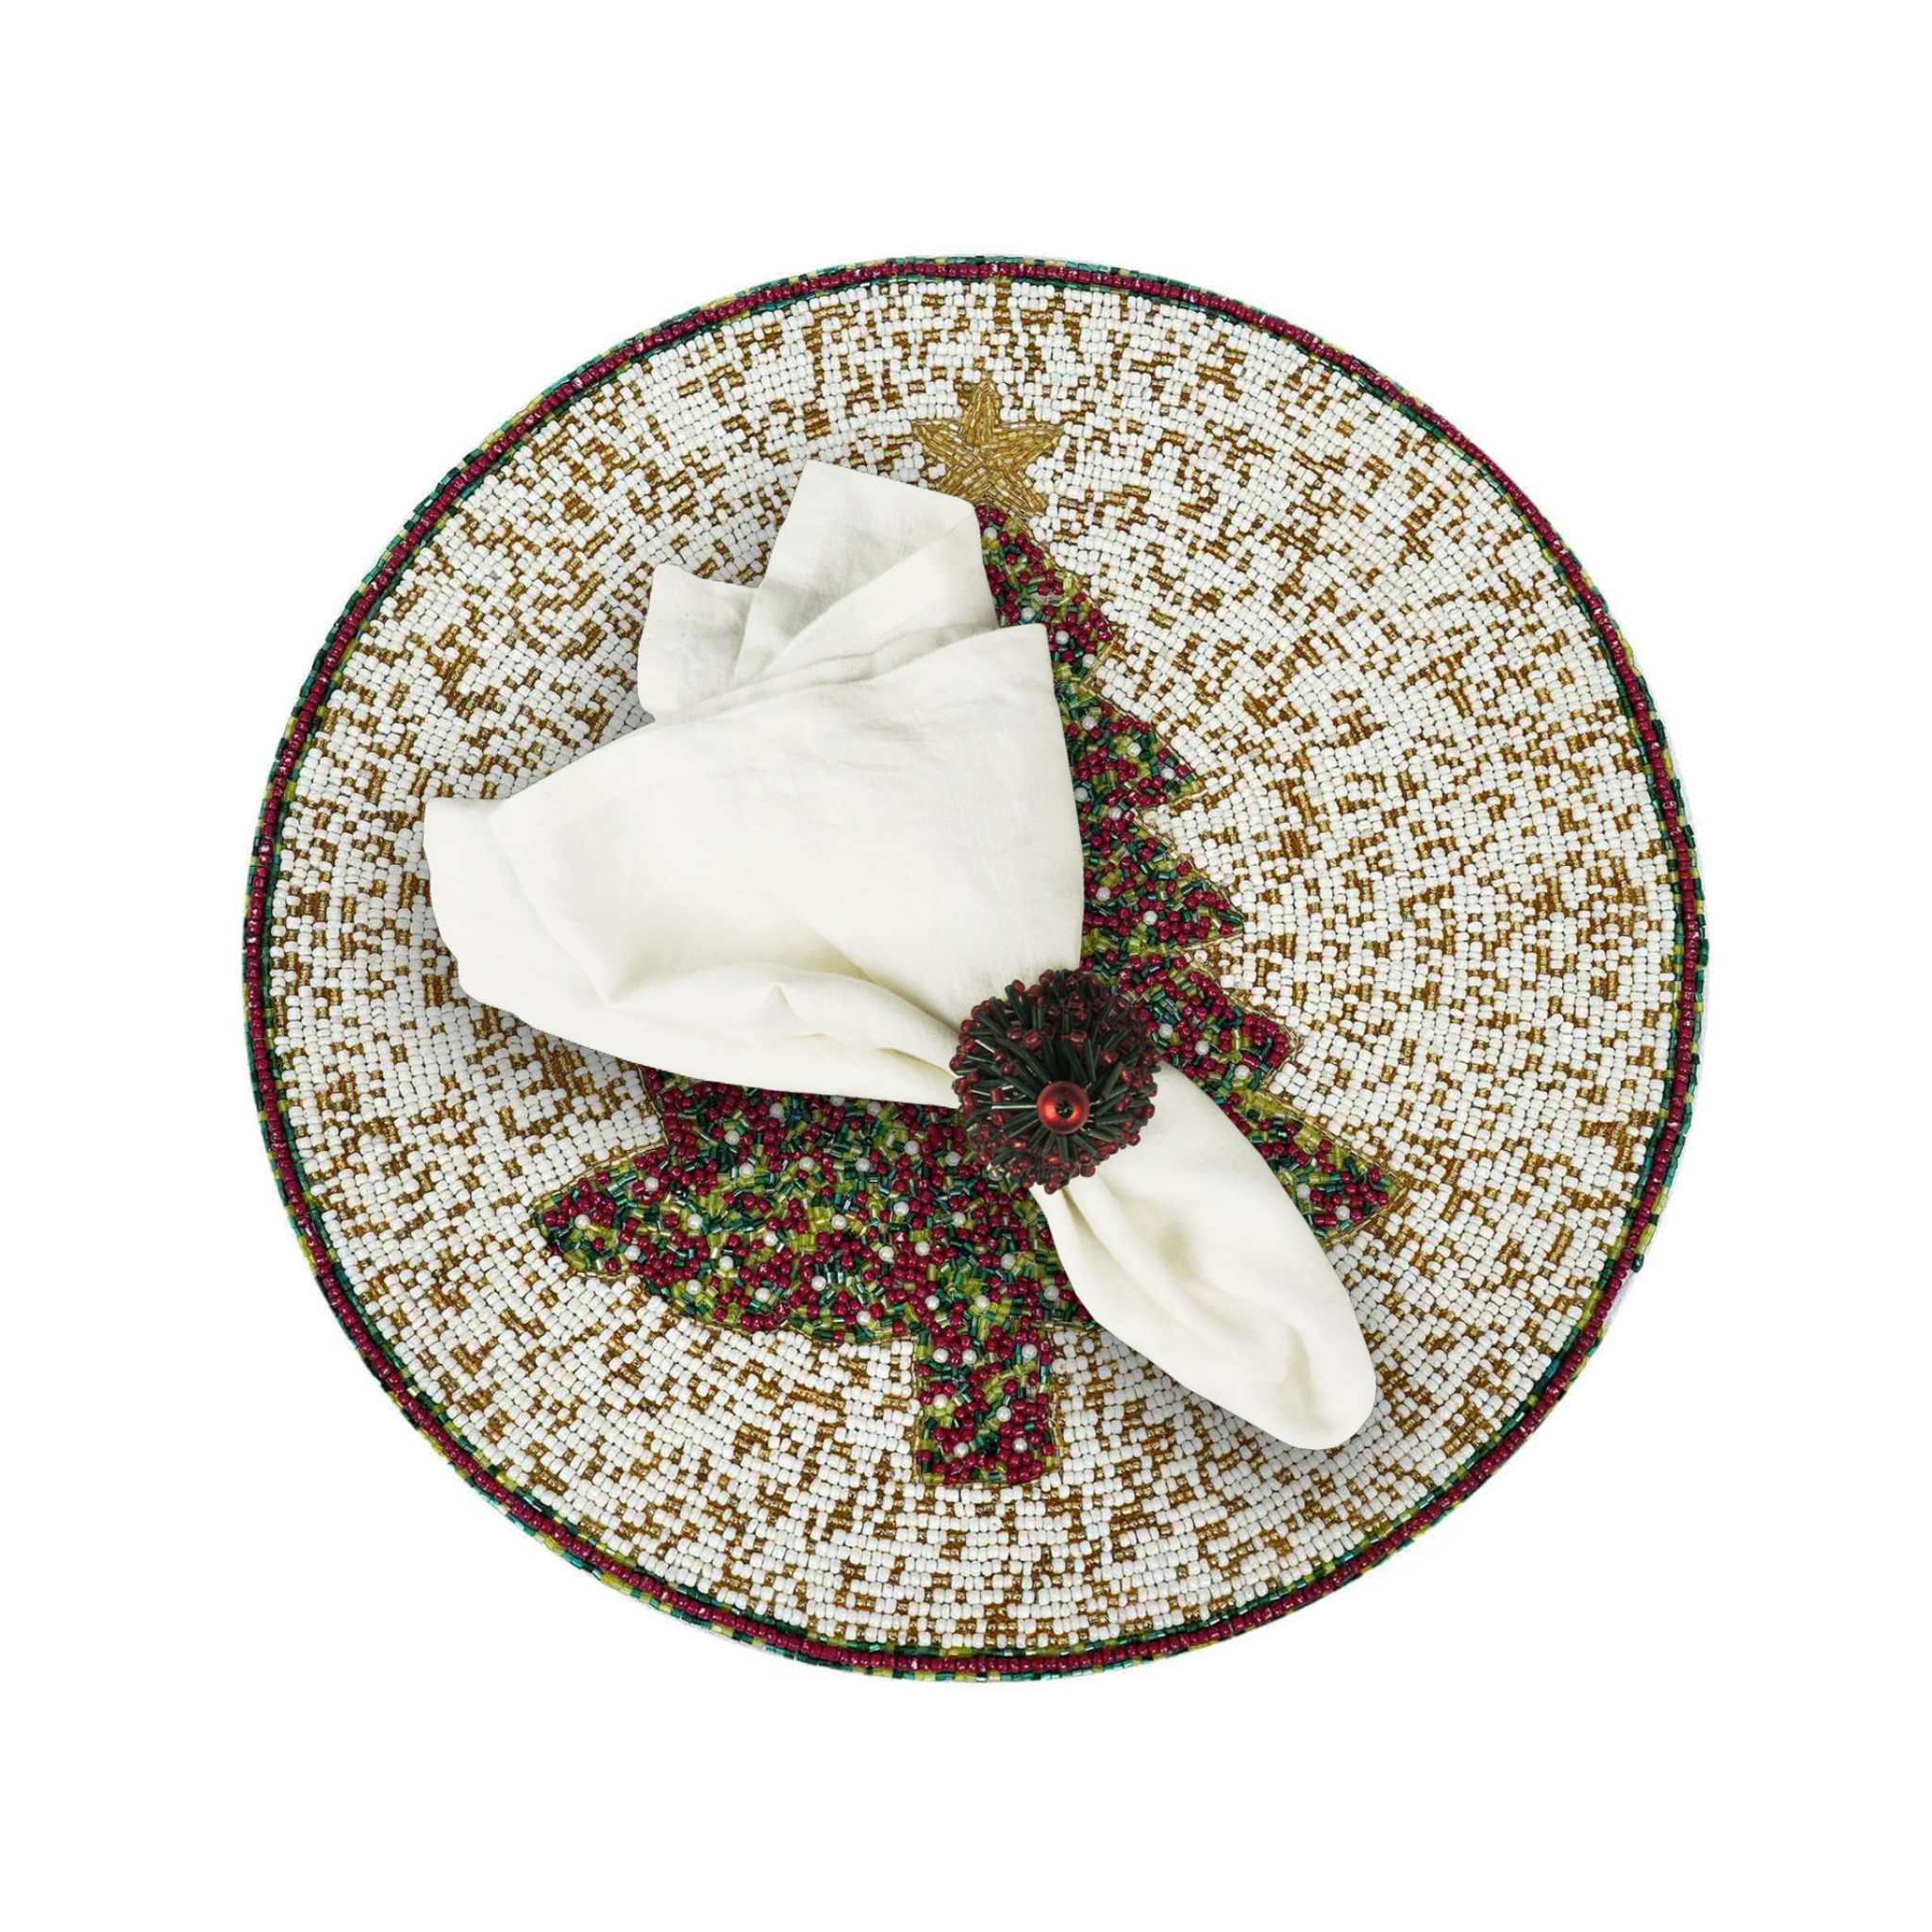 Fir Sure Bead Embroidered Placemat in Cream, Red & Green, Set of 2/4